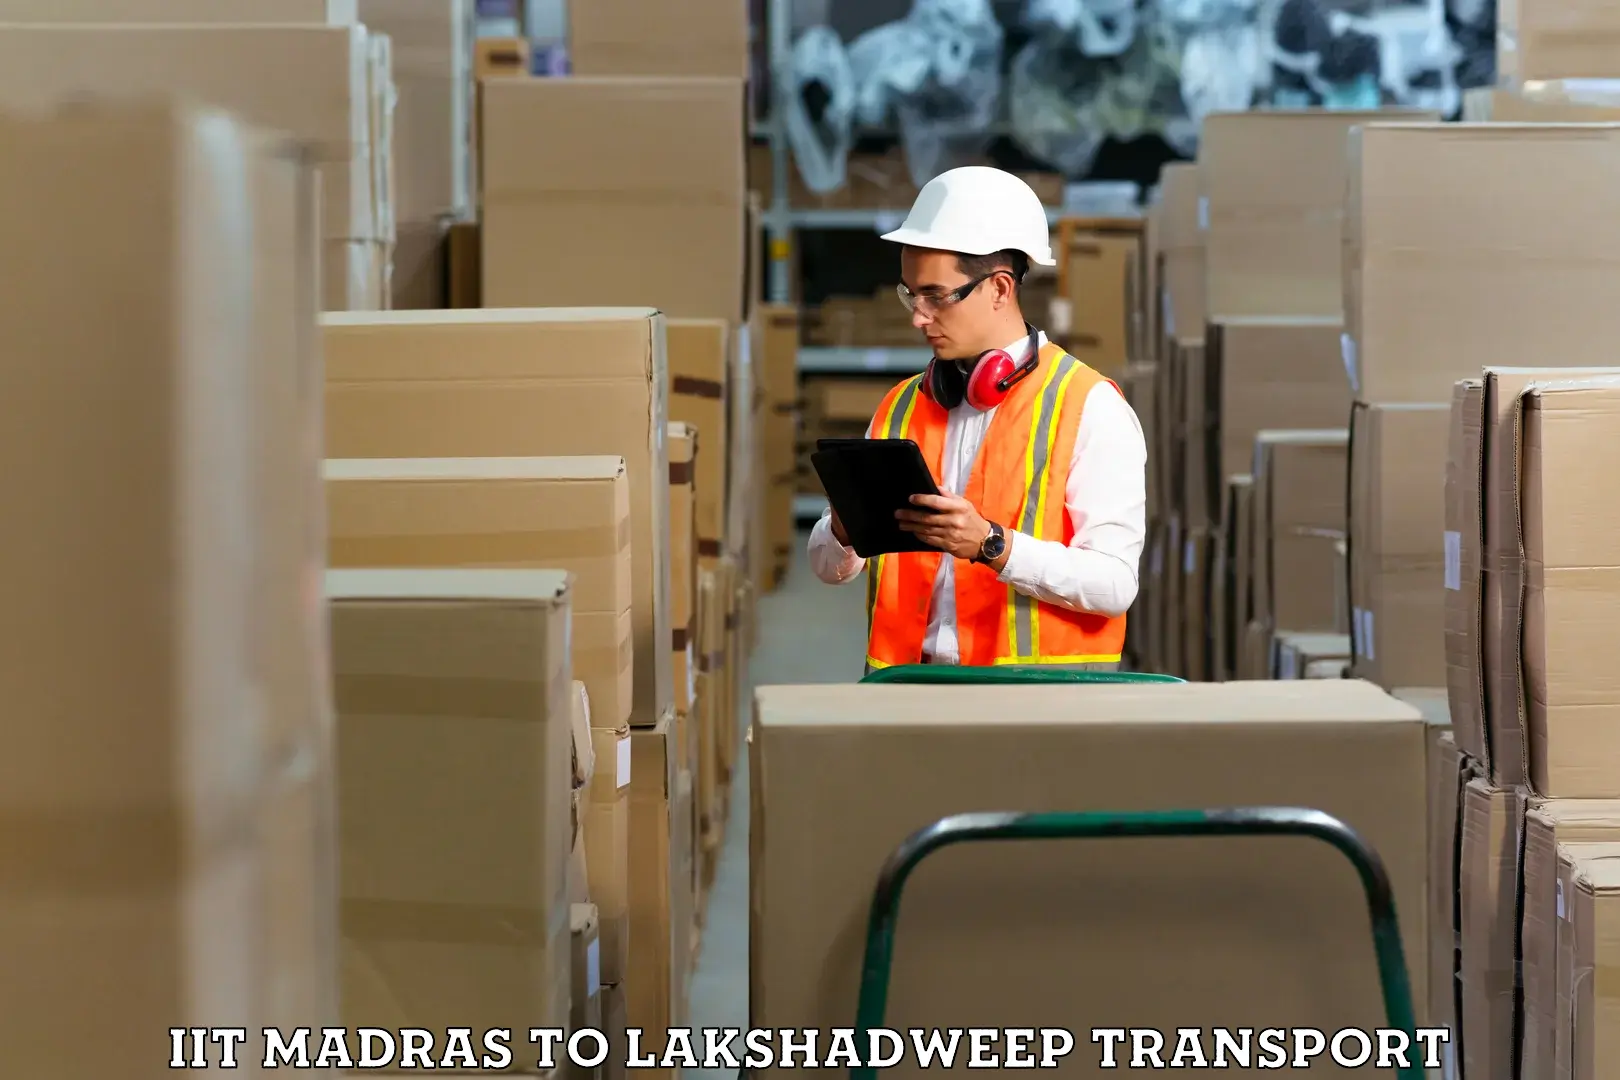 Container transport service IIT Madras to Lakshadweep